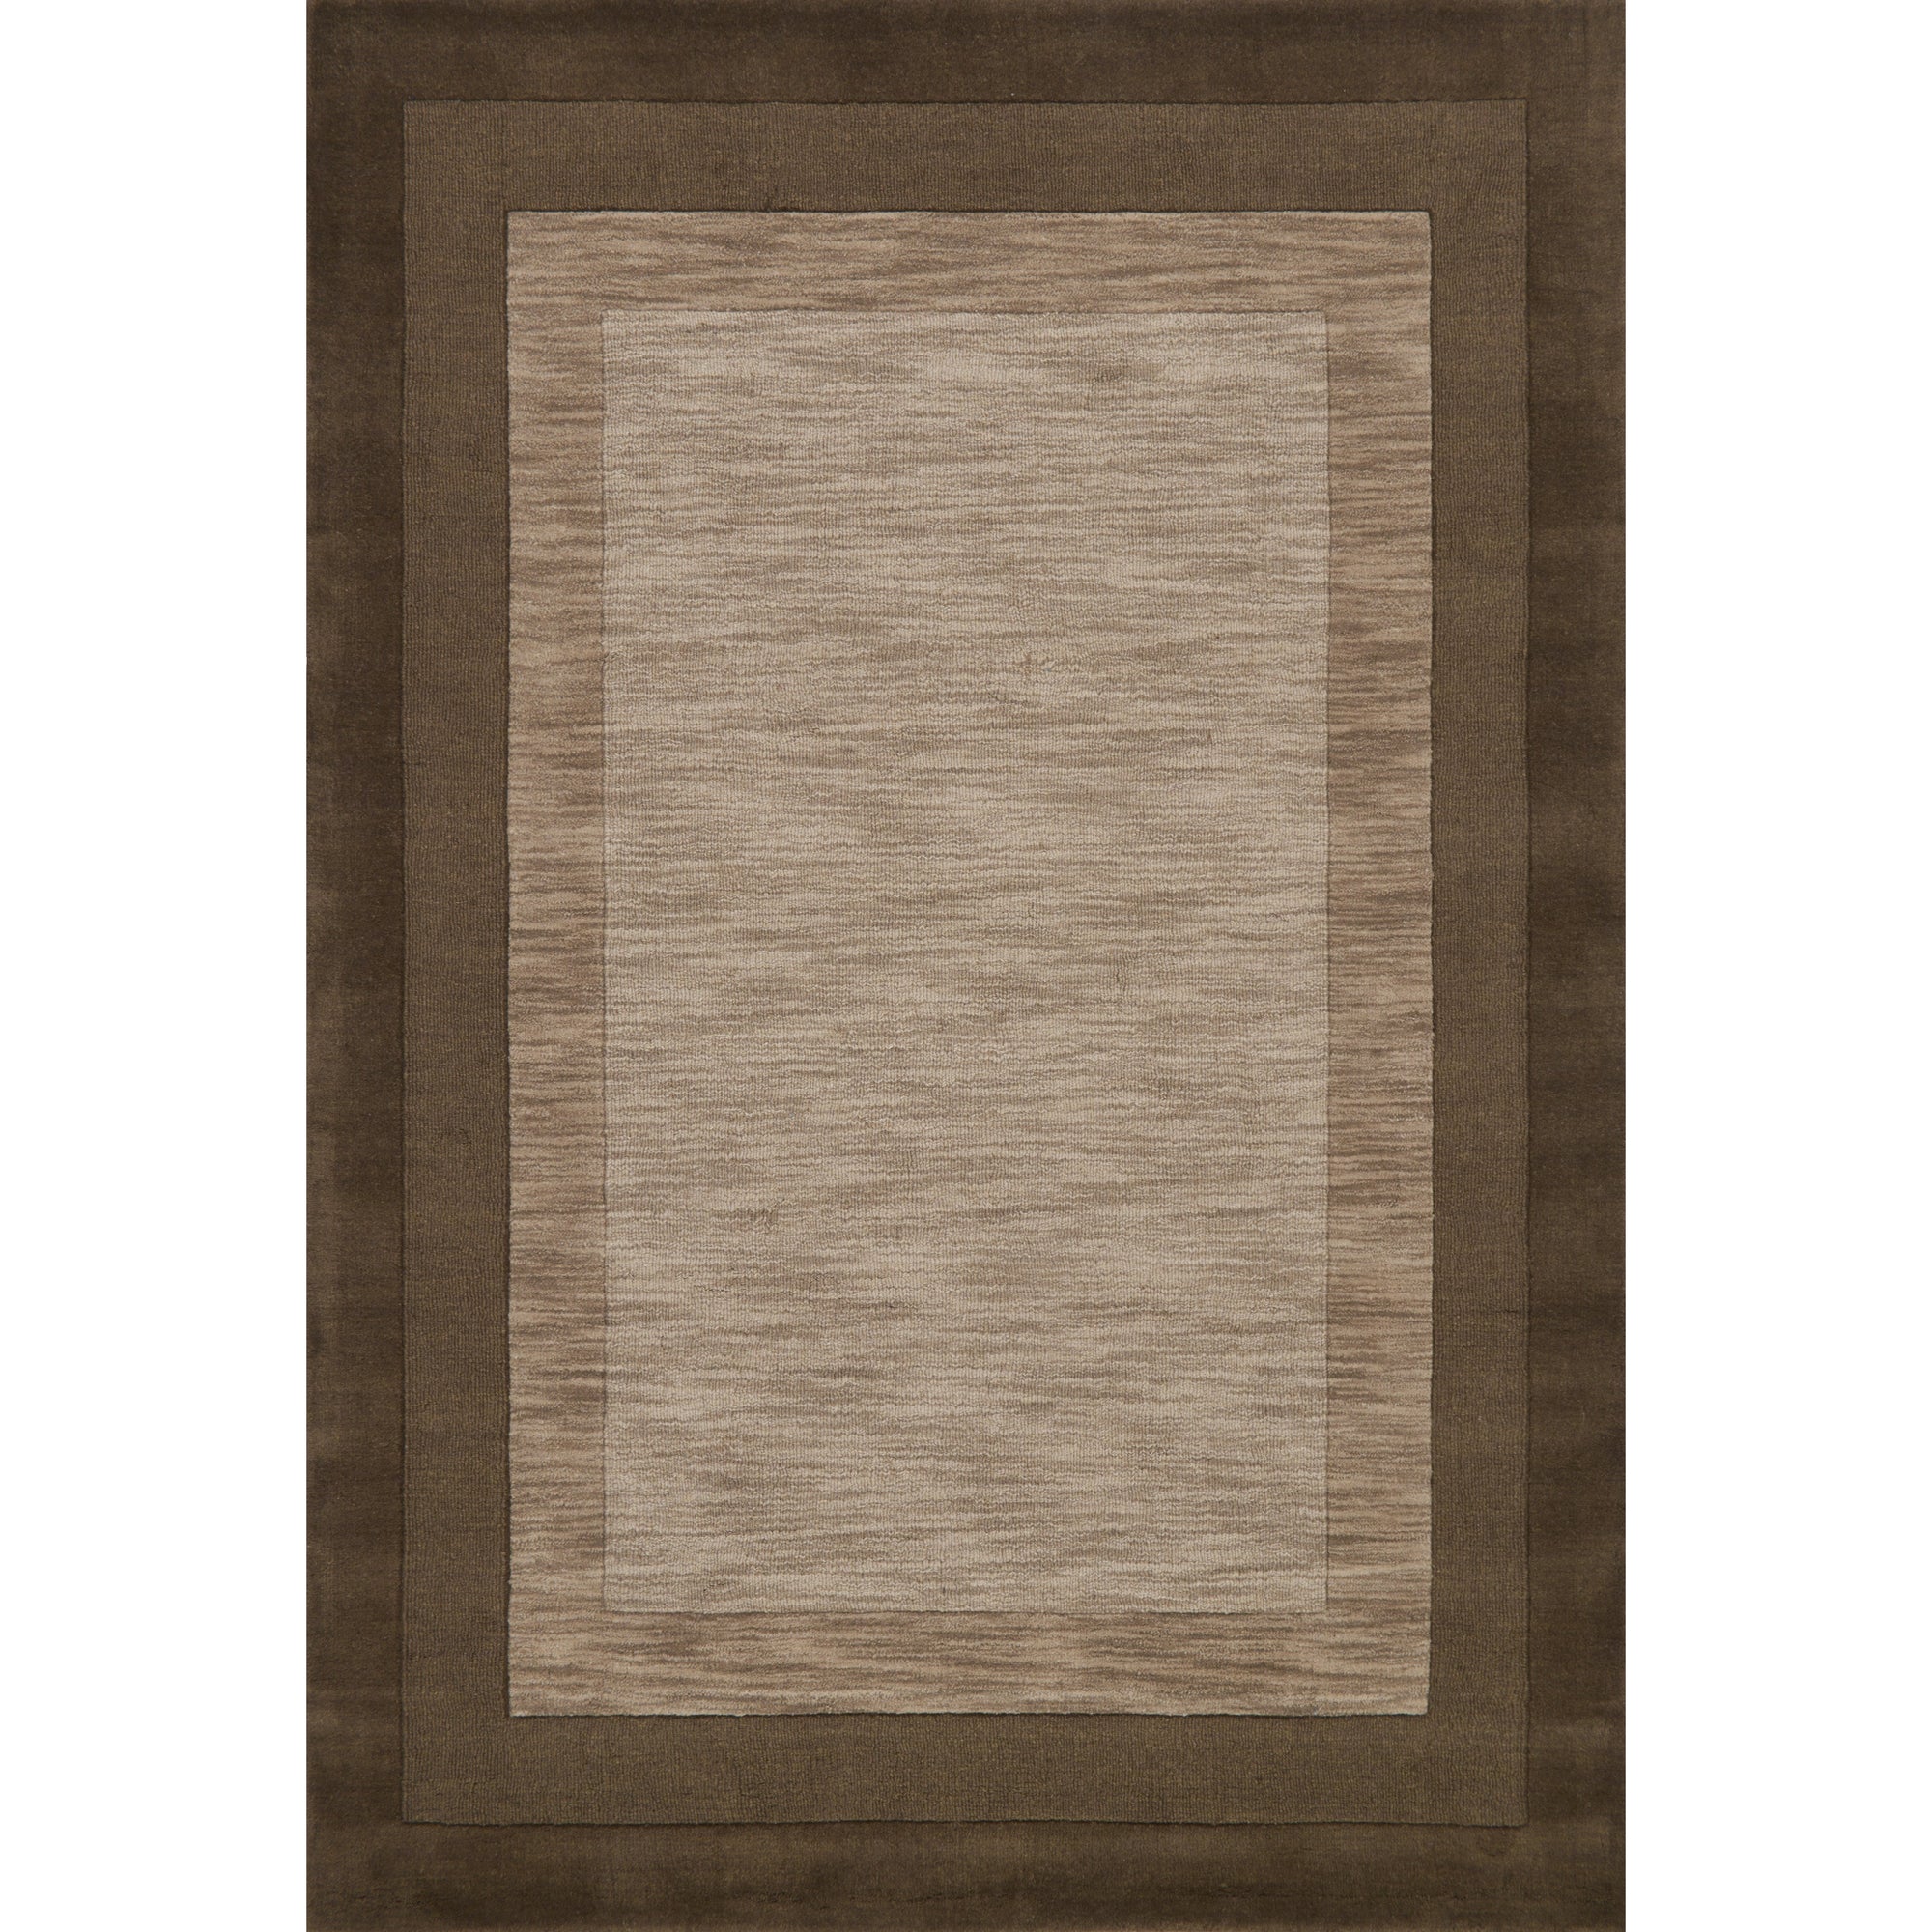 Rugs by Roo Loloi Hamilton Tobacco Area Rug in size 18" x 18" Sample